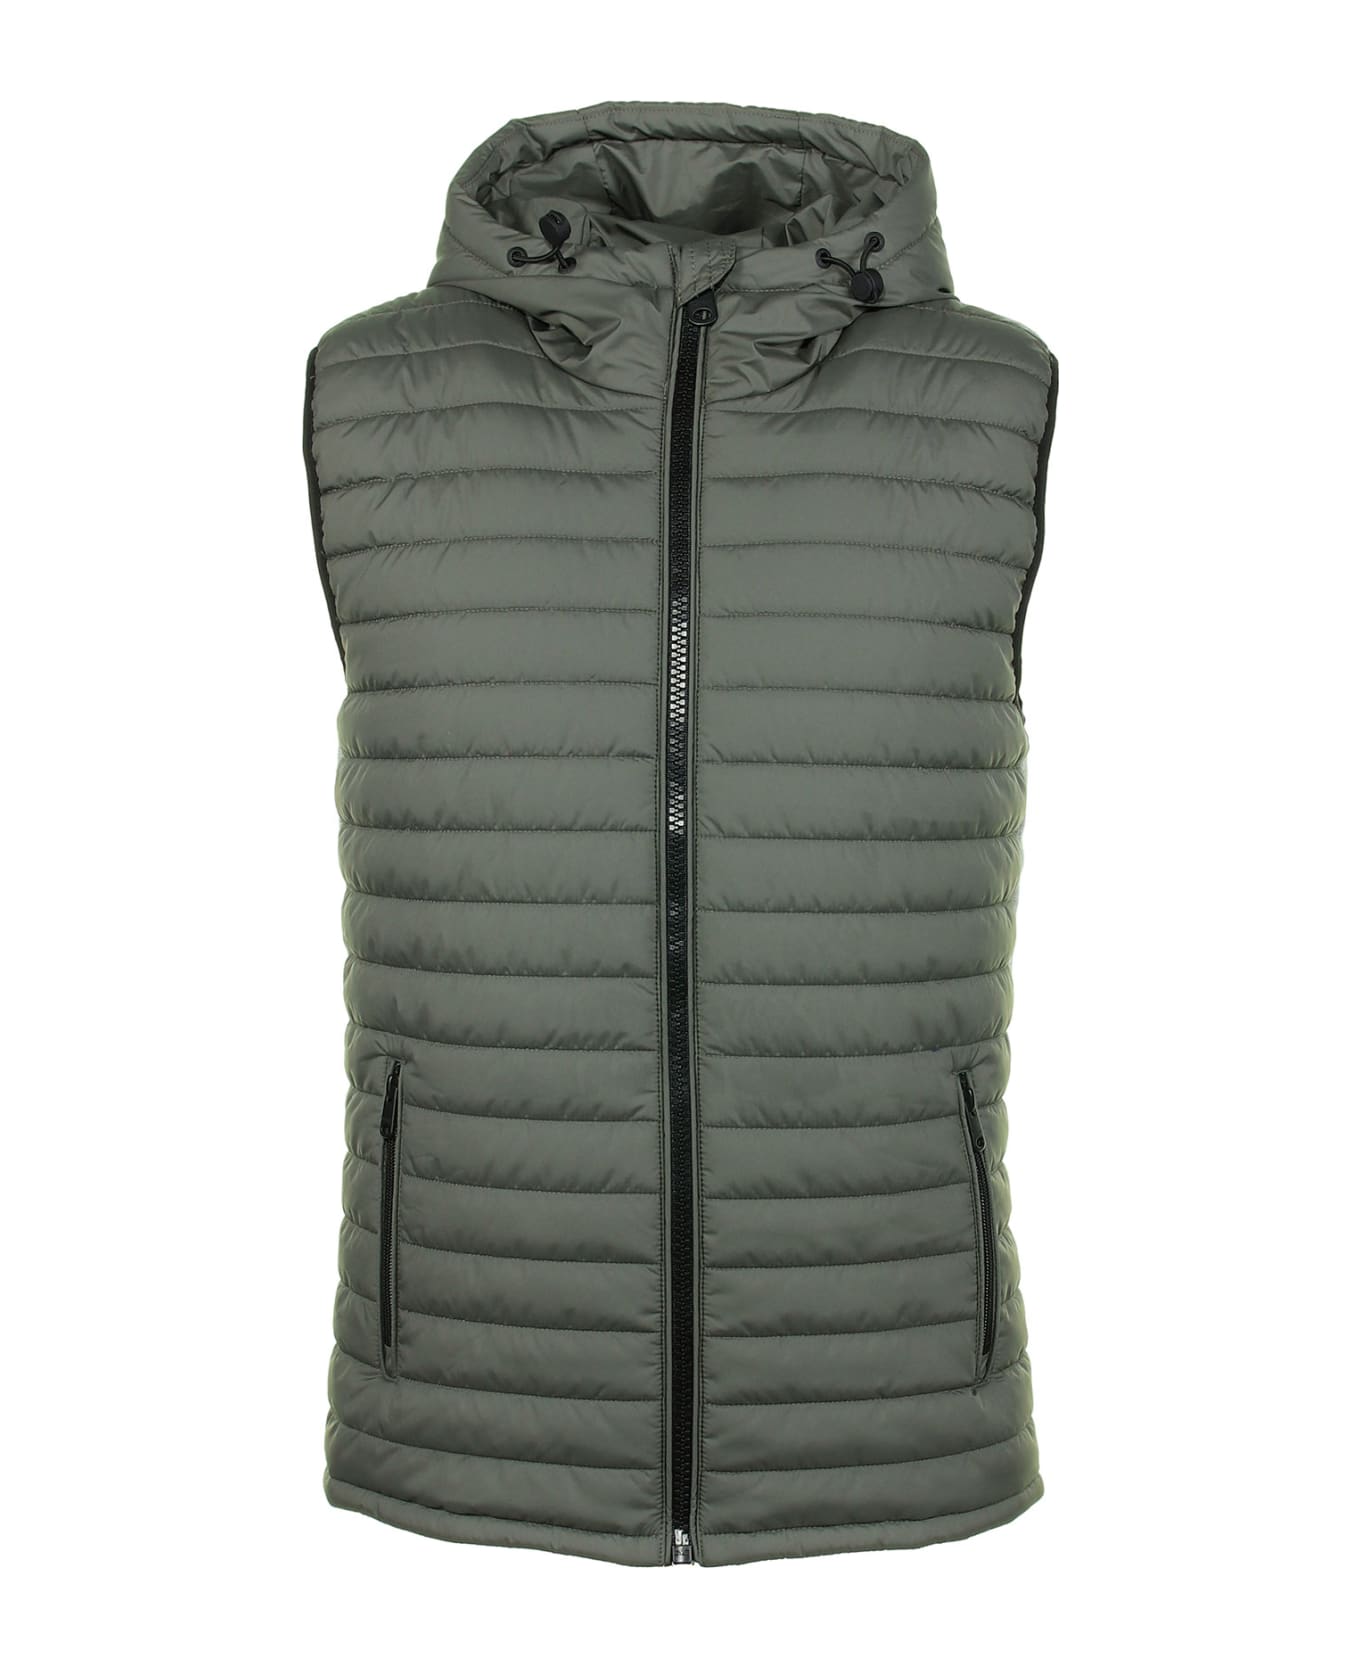 Ecoalf Quilted Vest With Hood - SOFT KHAKI